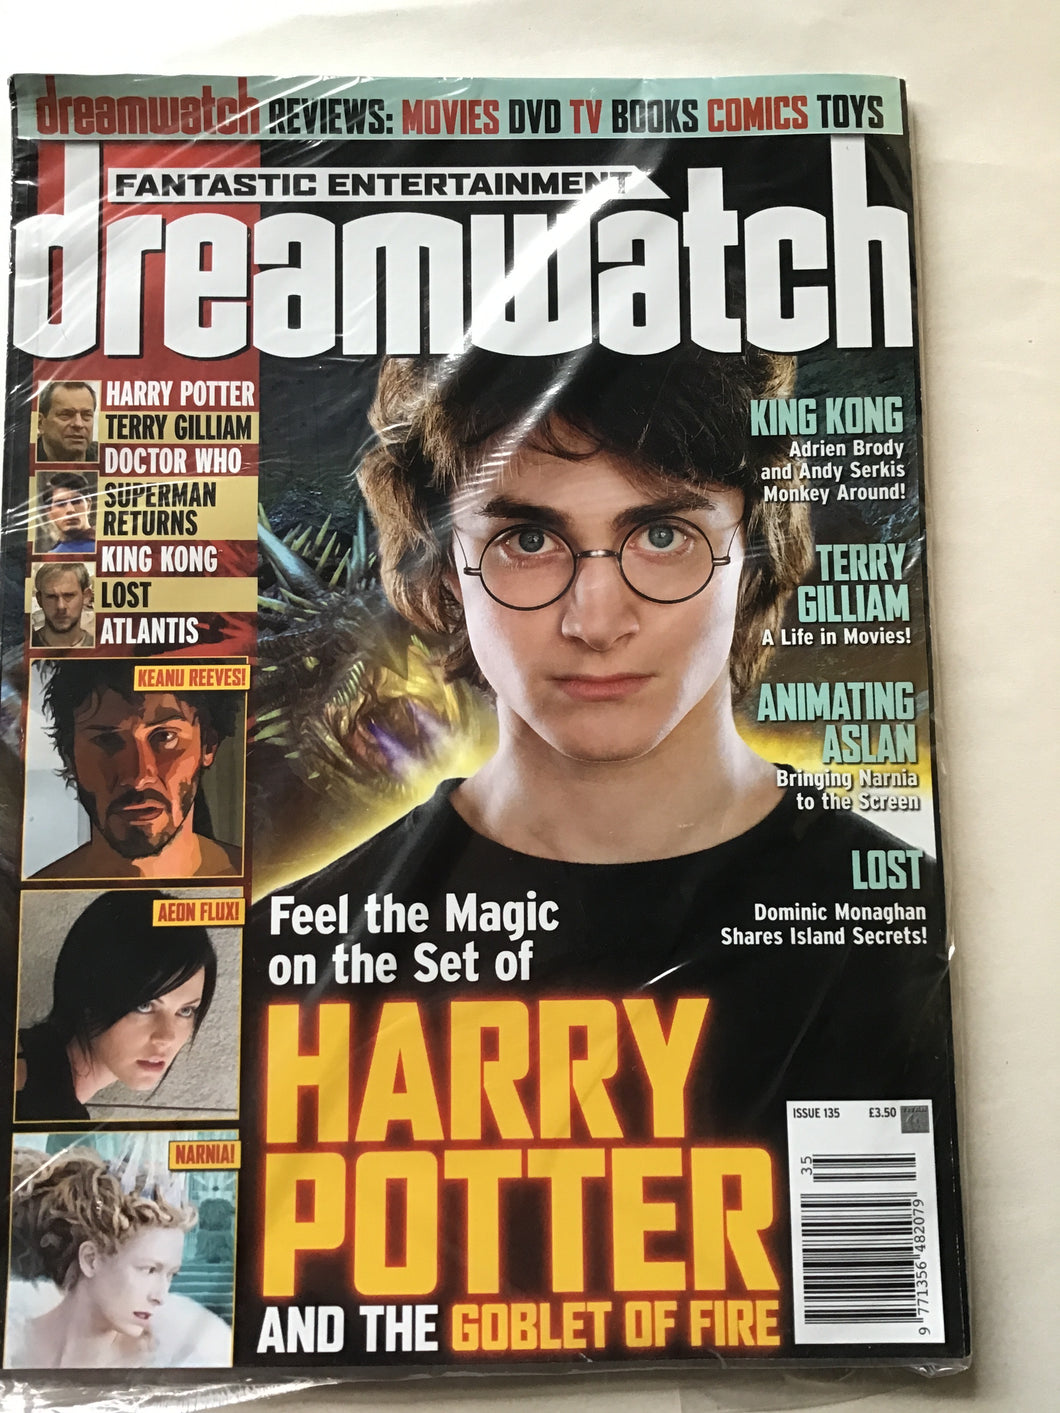 Dream watch magazine December 2005 issue 135 Terry Gilliam King Kong lost Keanu Reeves Aeon flux Narnia Harry Potter